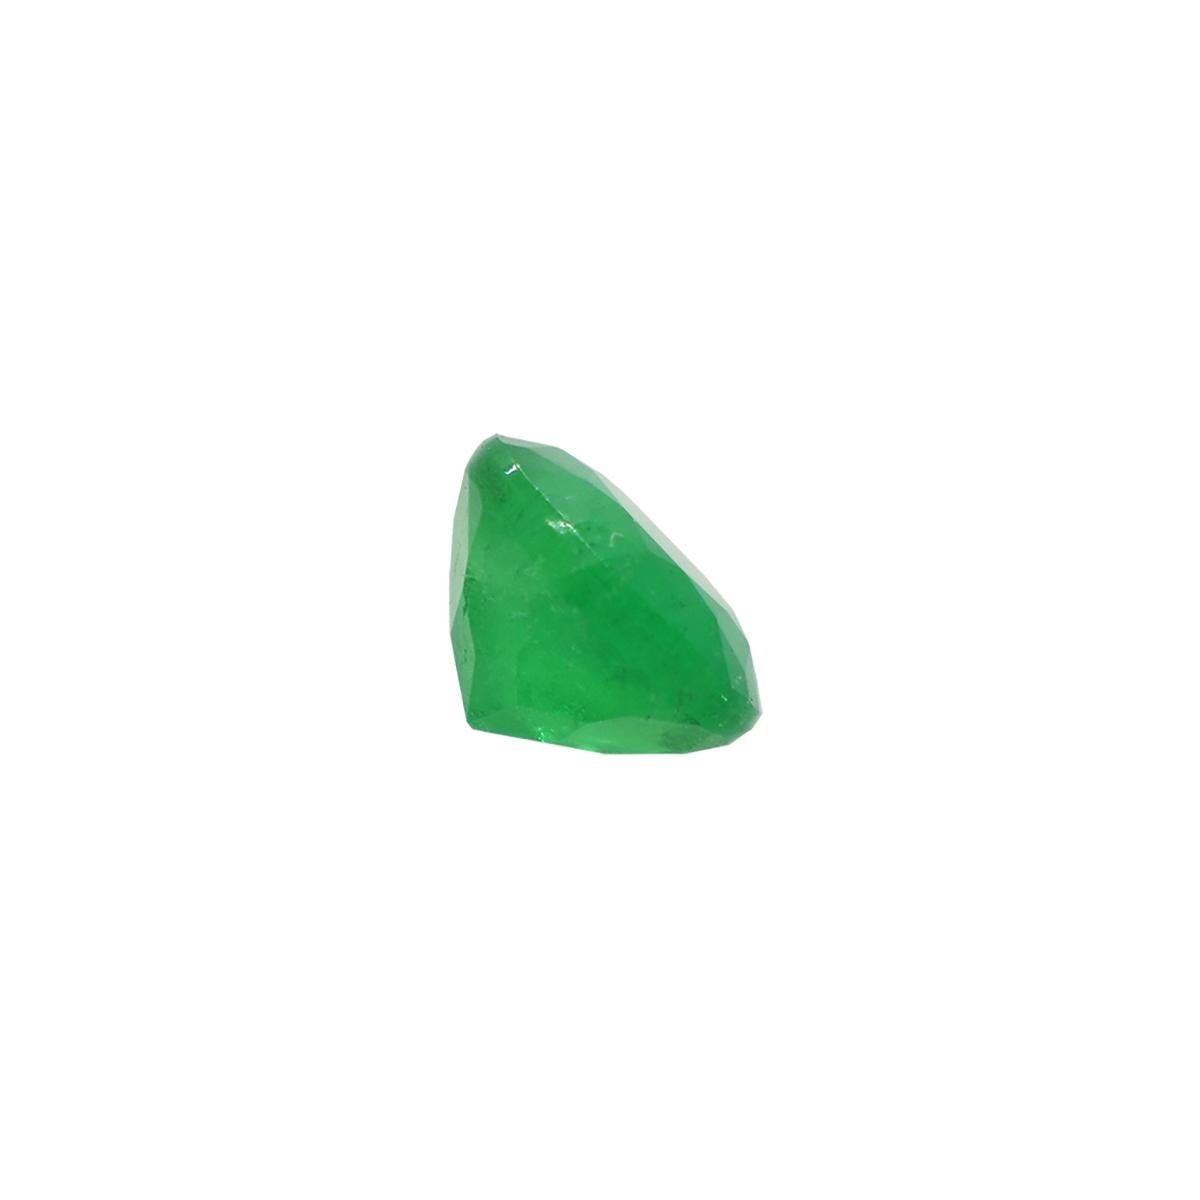 Beautiful loose round cut genuine natural emerald in 1.27 carats weight from Colombia. Its captivating medium dark green hue boasts remarkable saturation and included clarity, creating the famous grass green color that distinguishes Colombian